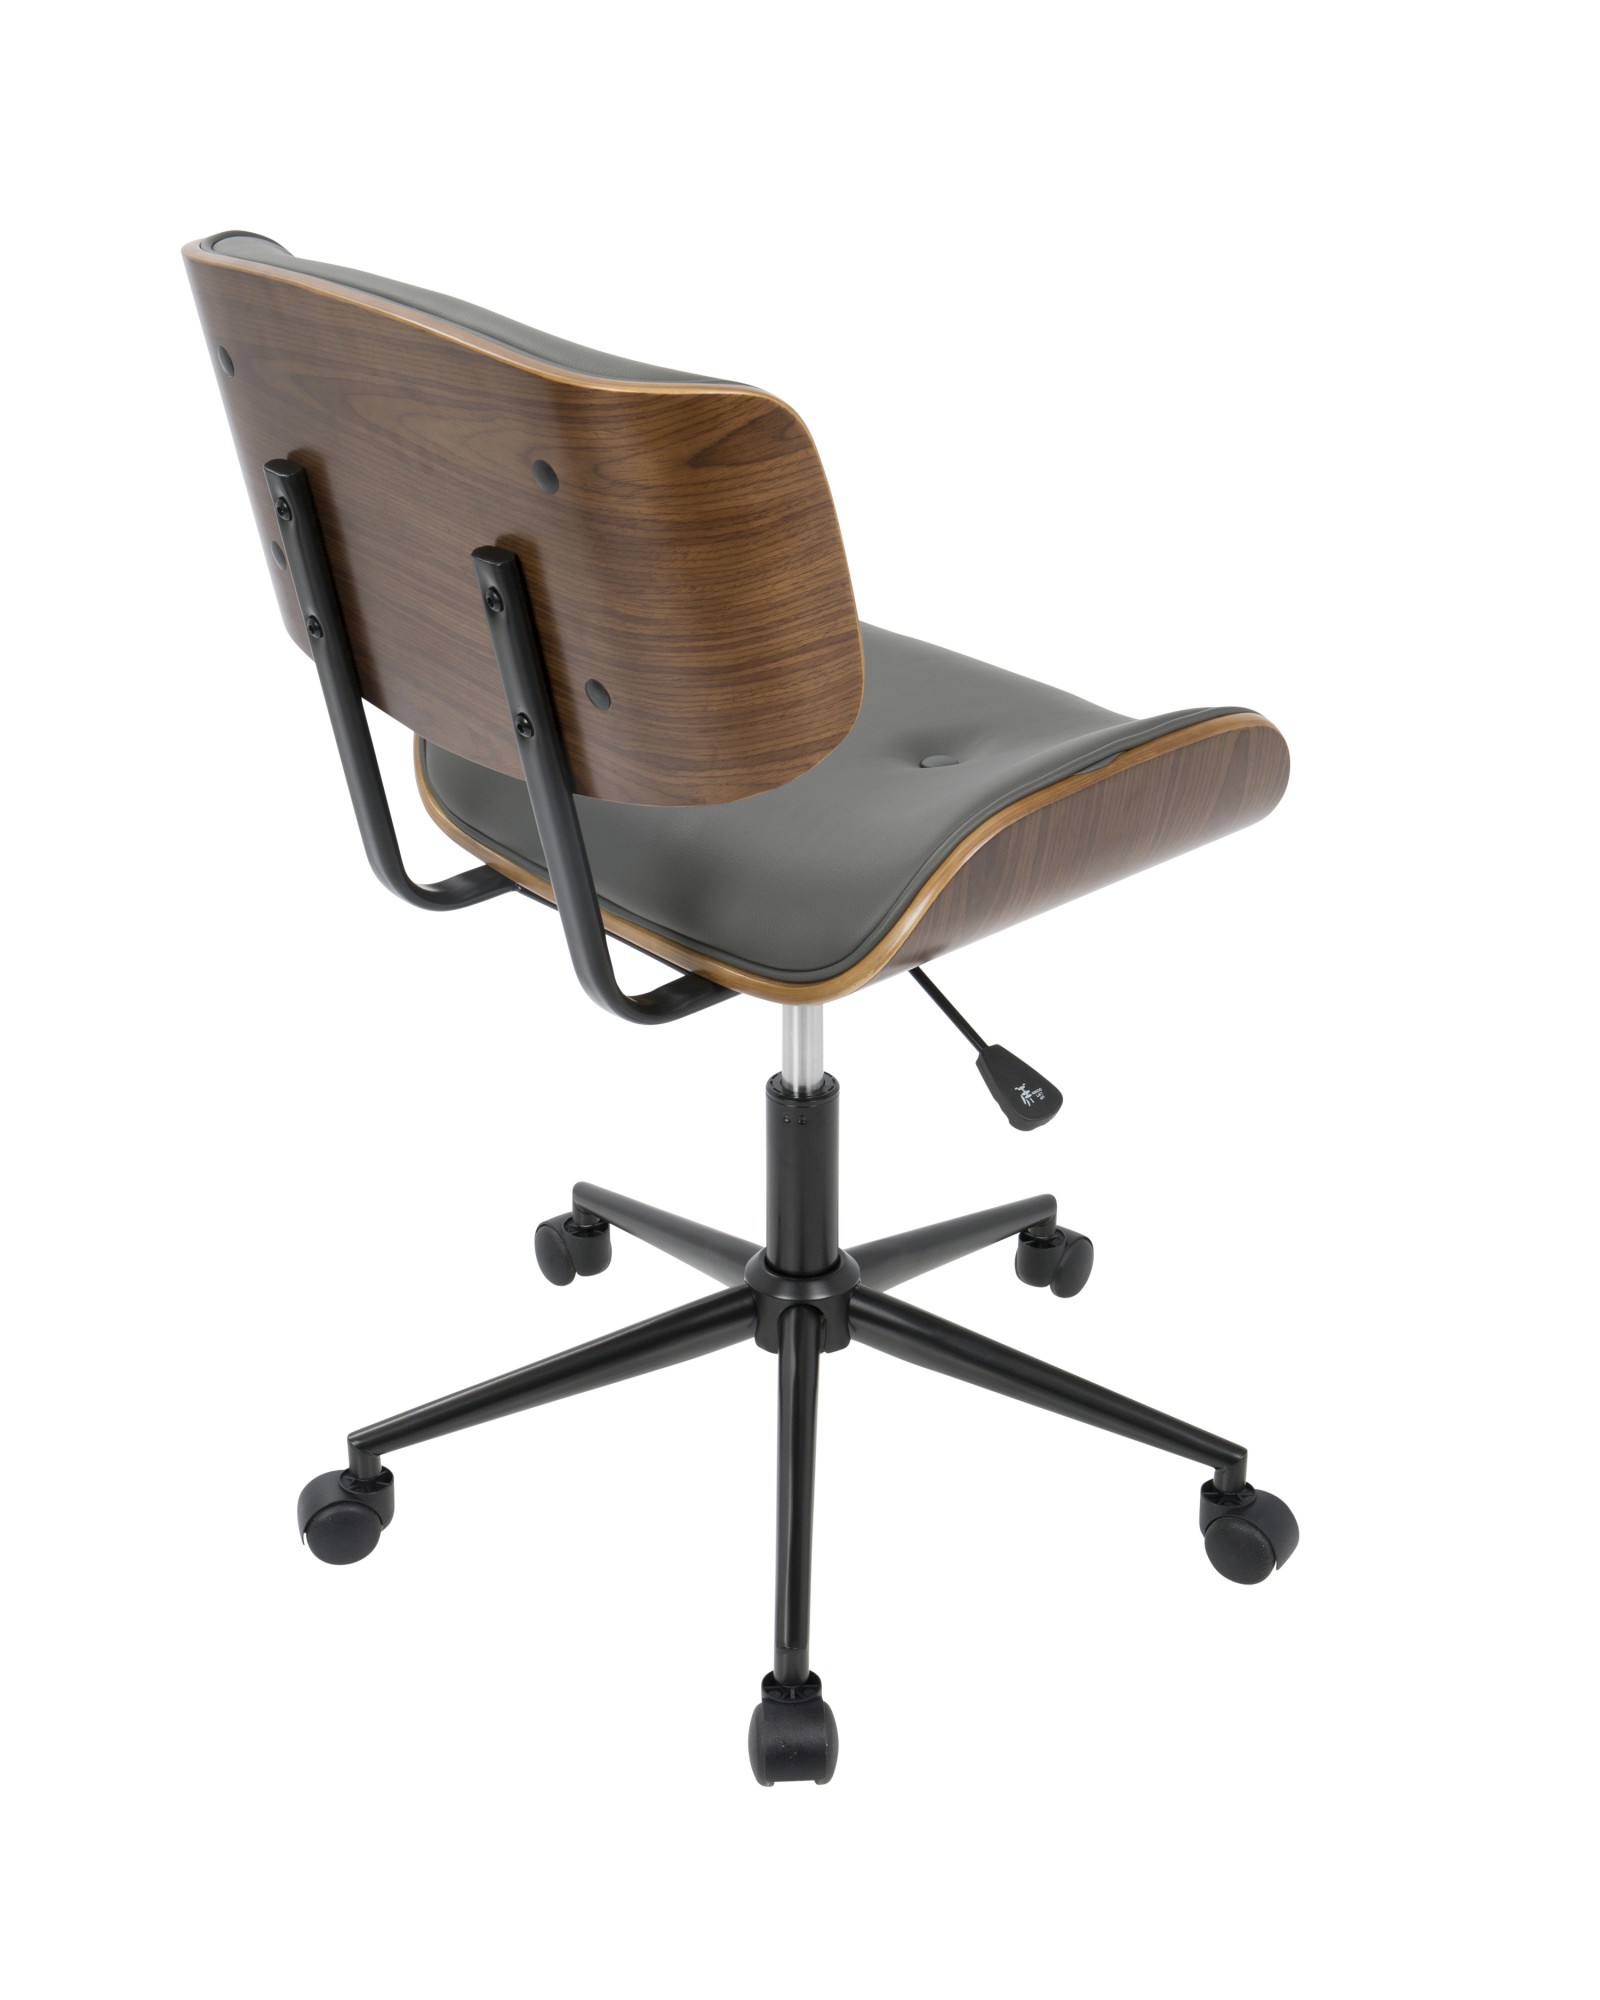 Lombardi Mid-Century Modern Adjustable Office Chair with Swivel in Walnut and Grey